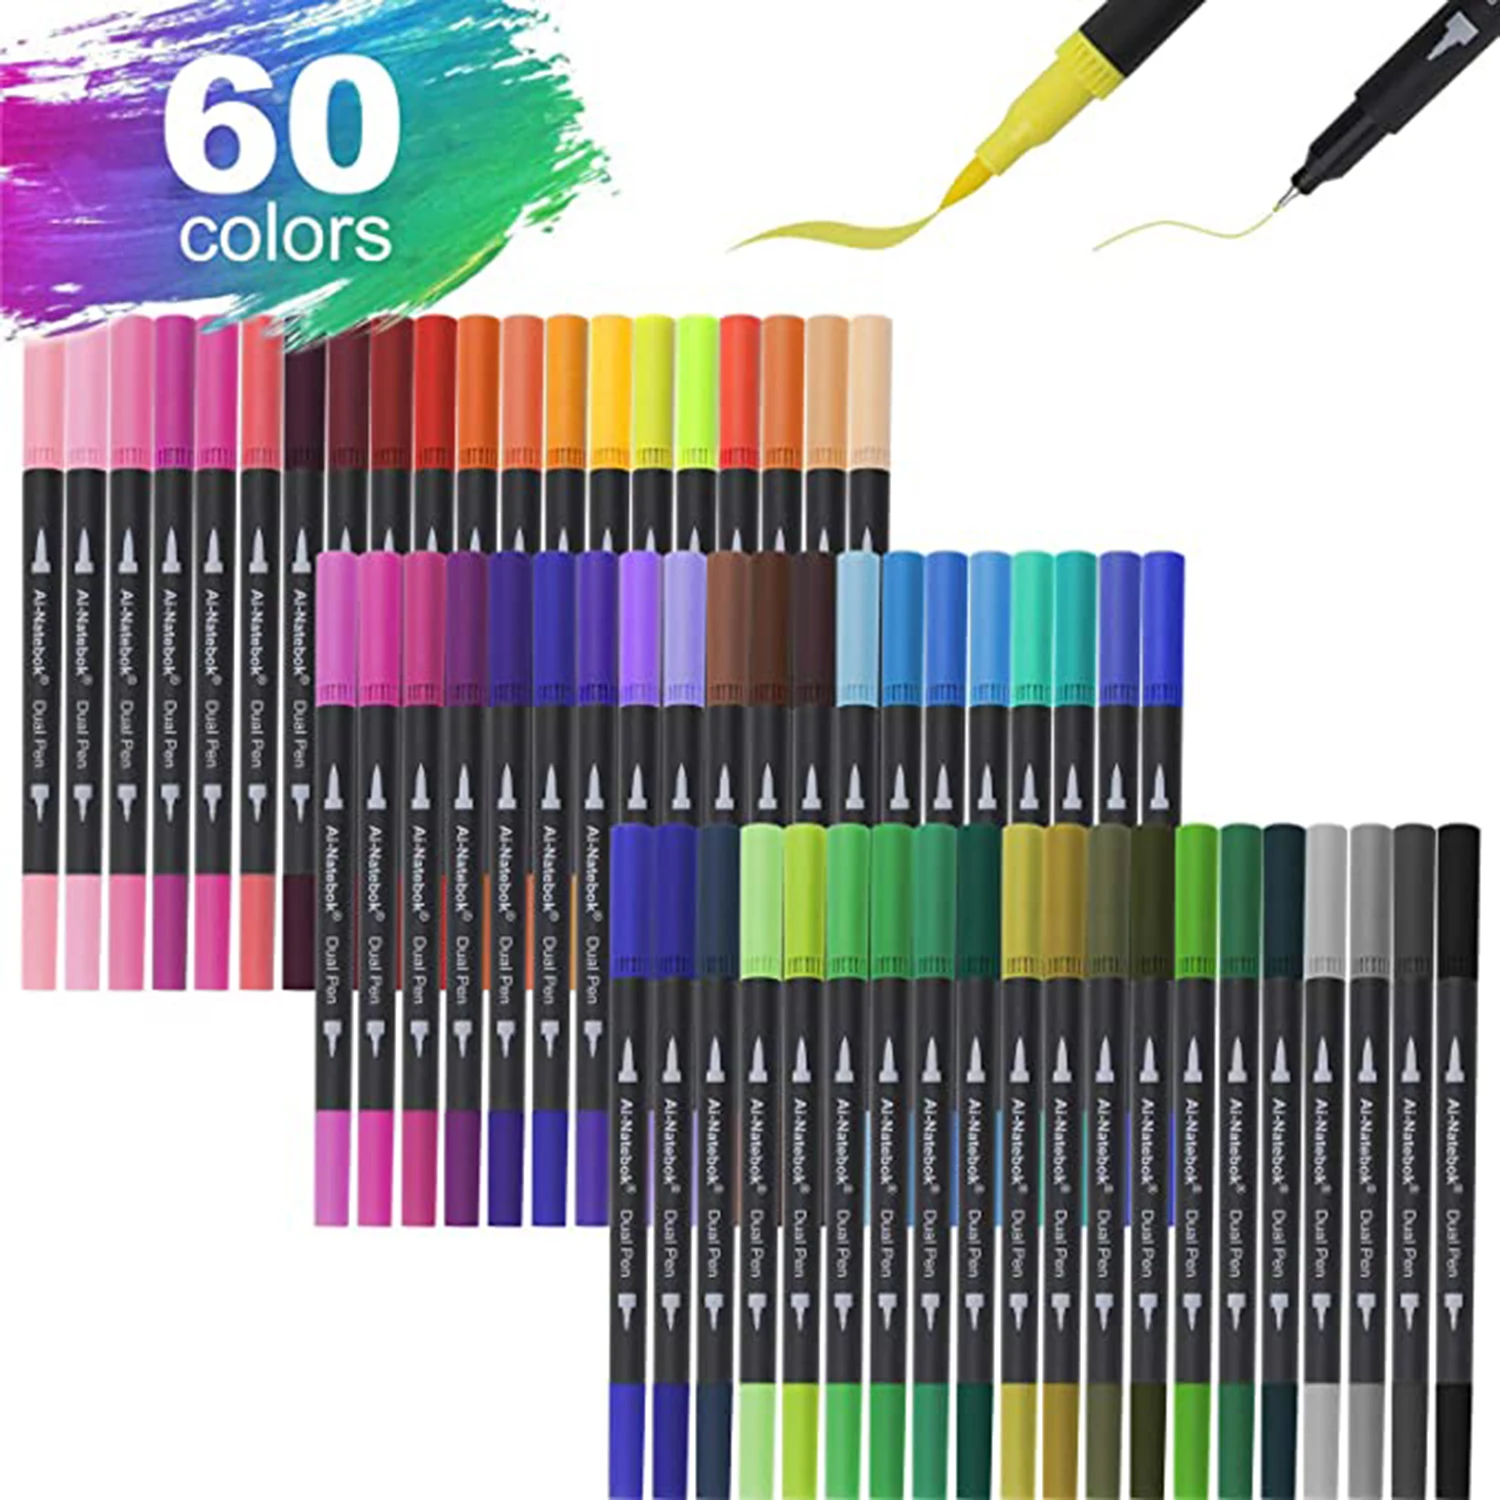 

60 Colors Dual Tip Brush Art Marker Pens Coloring Markers Fine & Brush Tip Pen for Adult Coloring Book Note Taking Art Supplier